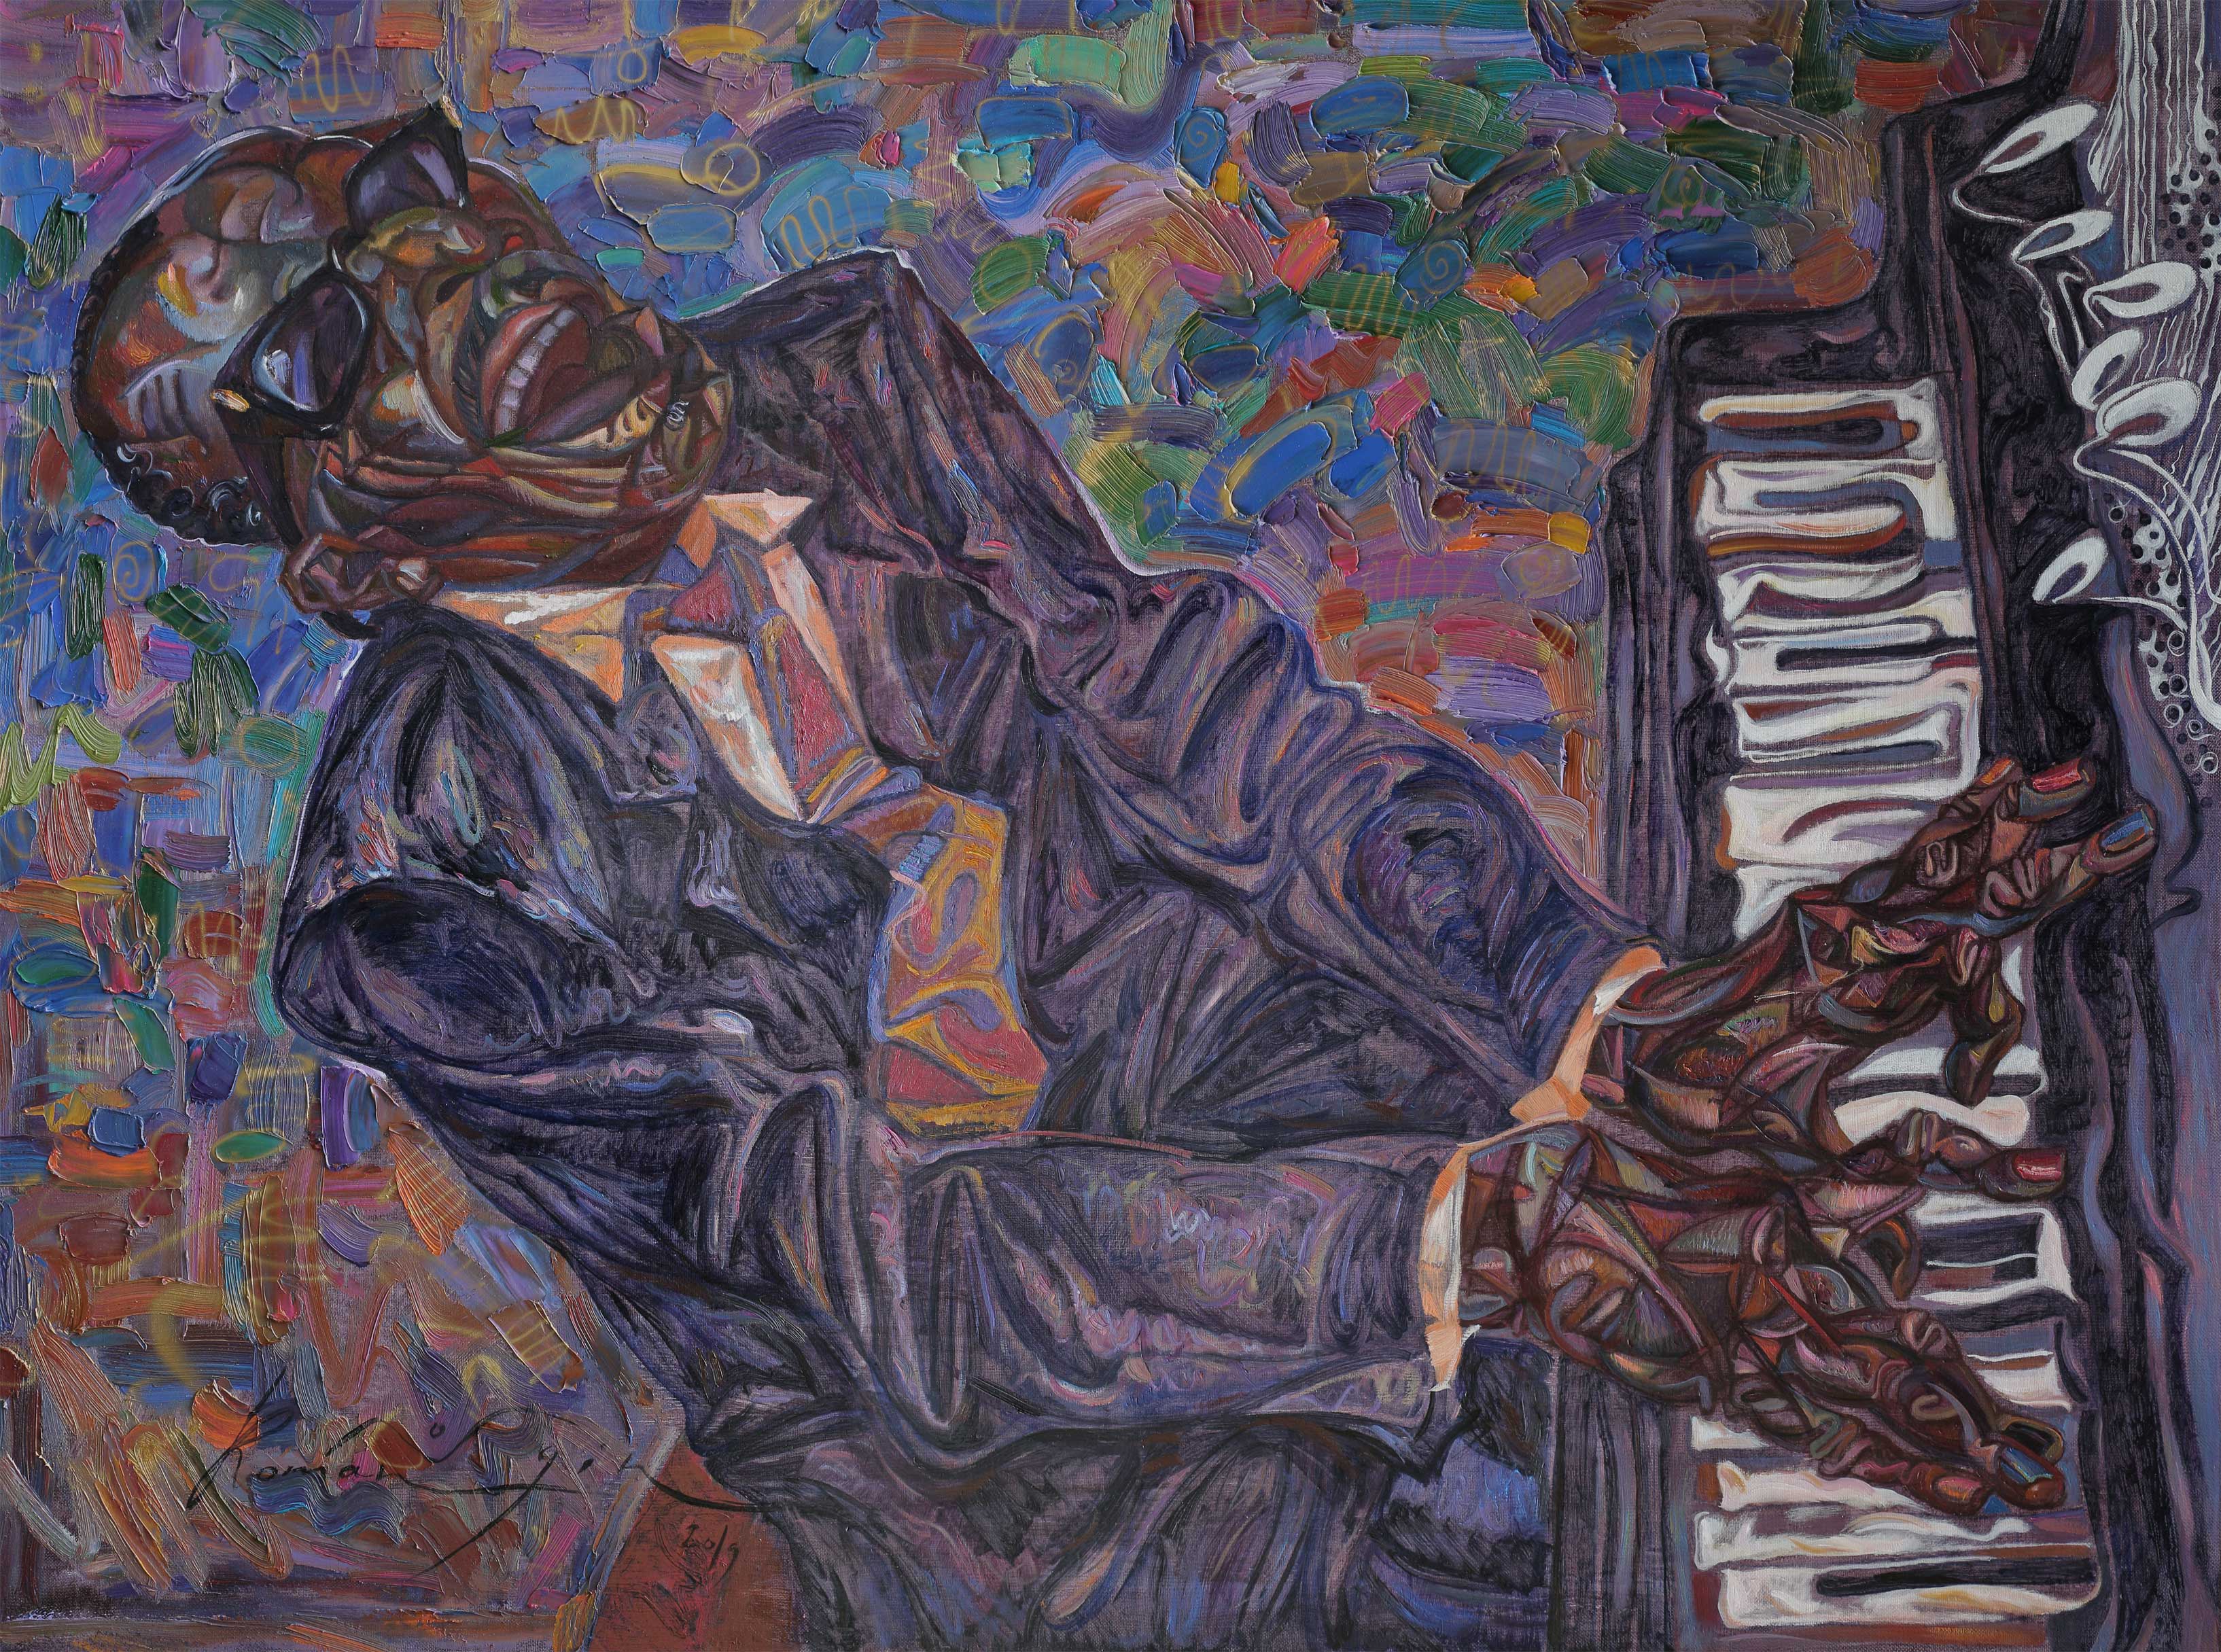 Roman Nogin; Ray Charles, 2020, Original Painting Oil, 115 x 85 cm. Artwork description: 241 Series aEURJazz PeopleaEURThis series includes compositions of various typesPortraits, Compositions Of Several Figures, Decorative And Abstract Compositions From Musical Instruments , But United By One Theme - The Music Of Jazz.The Main Concept of all these paintings isto express the music of Jazz through color, plastic lines ...